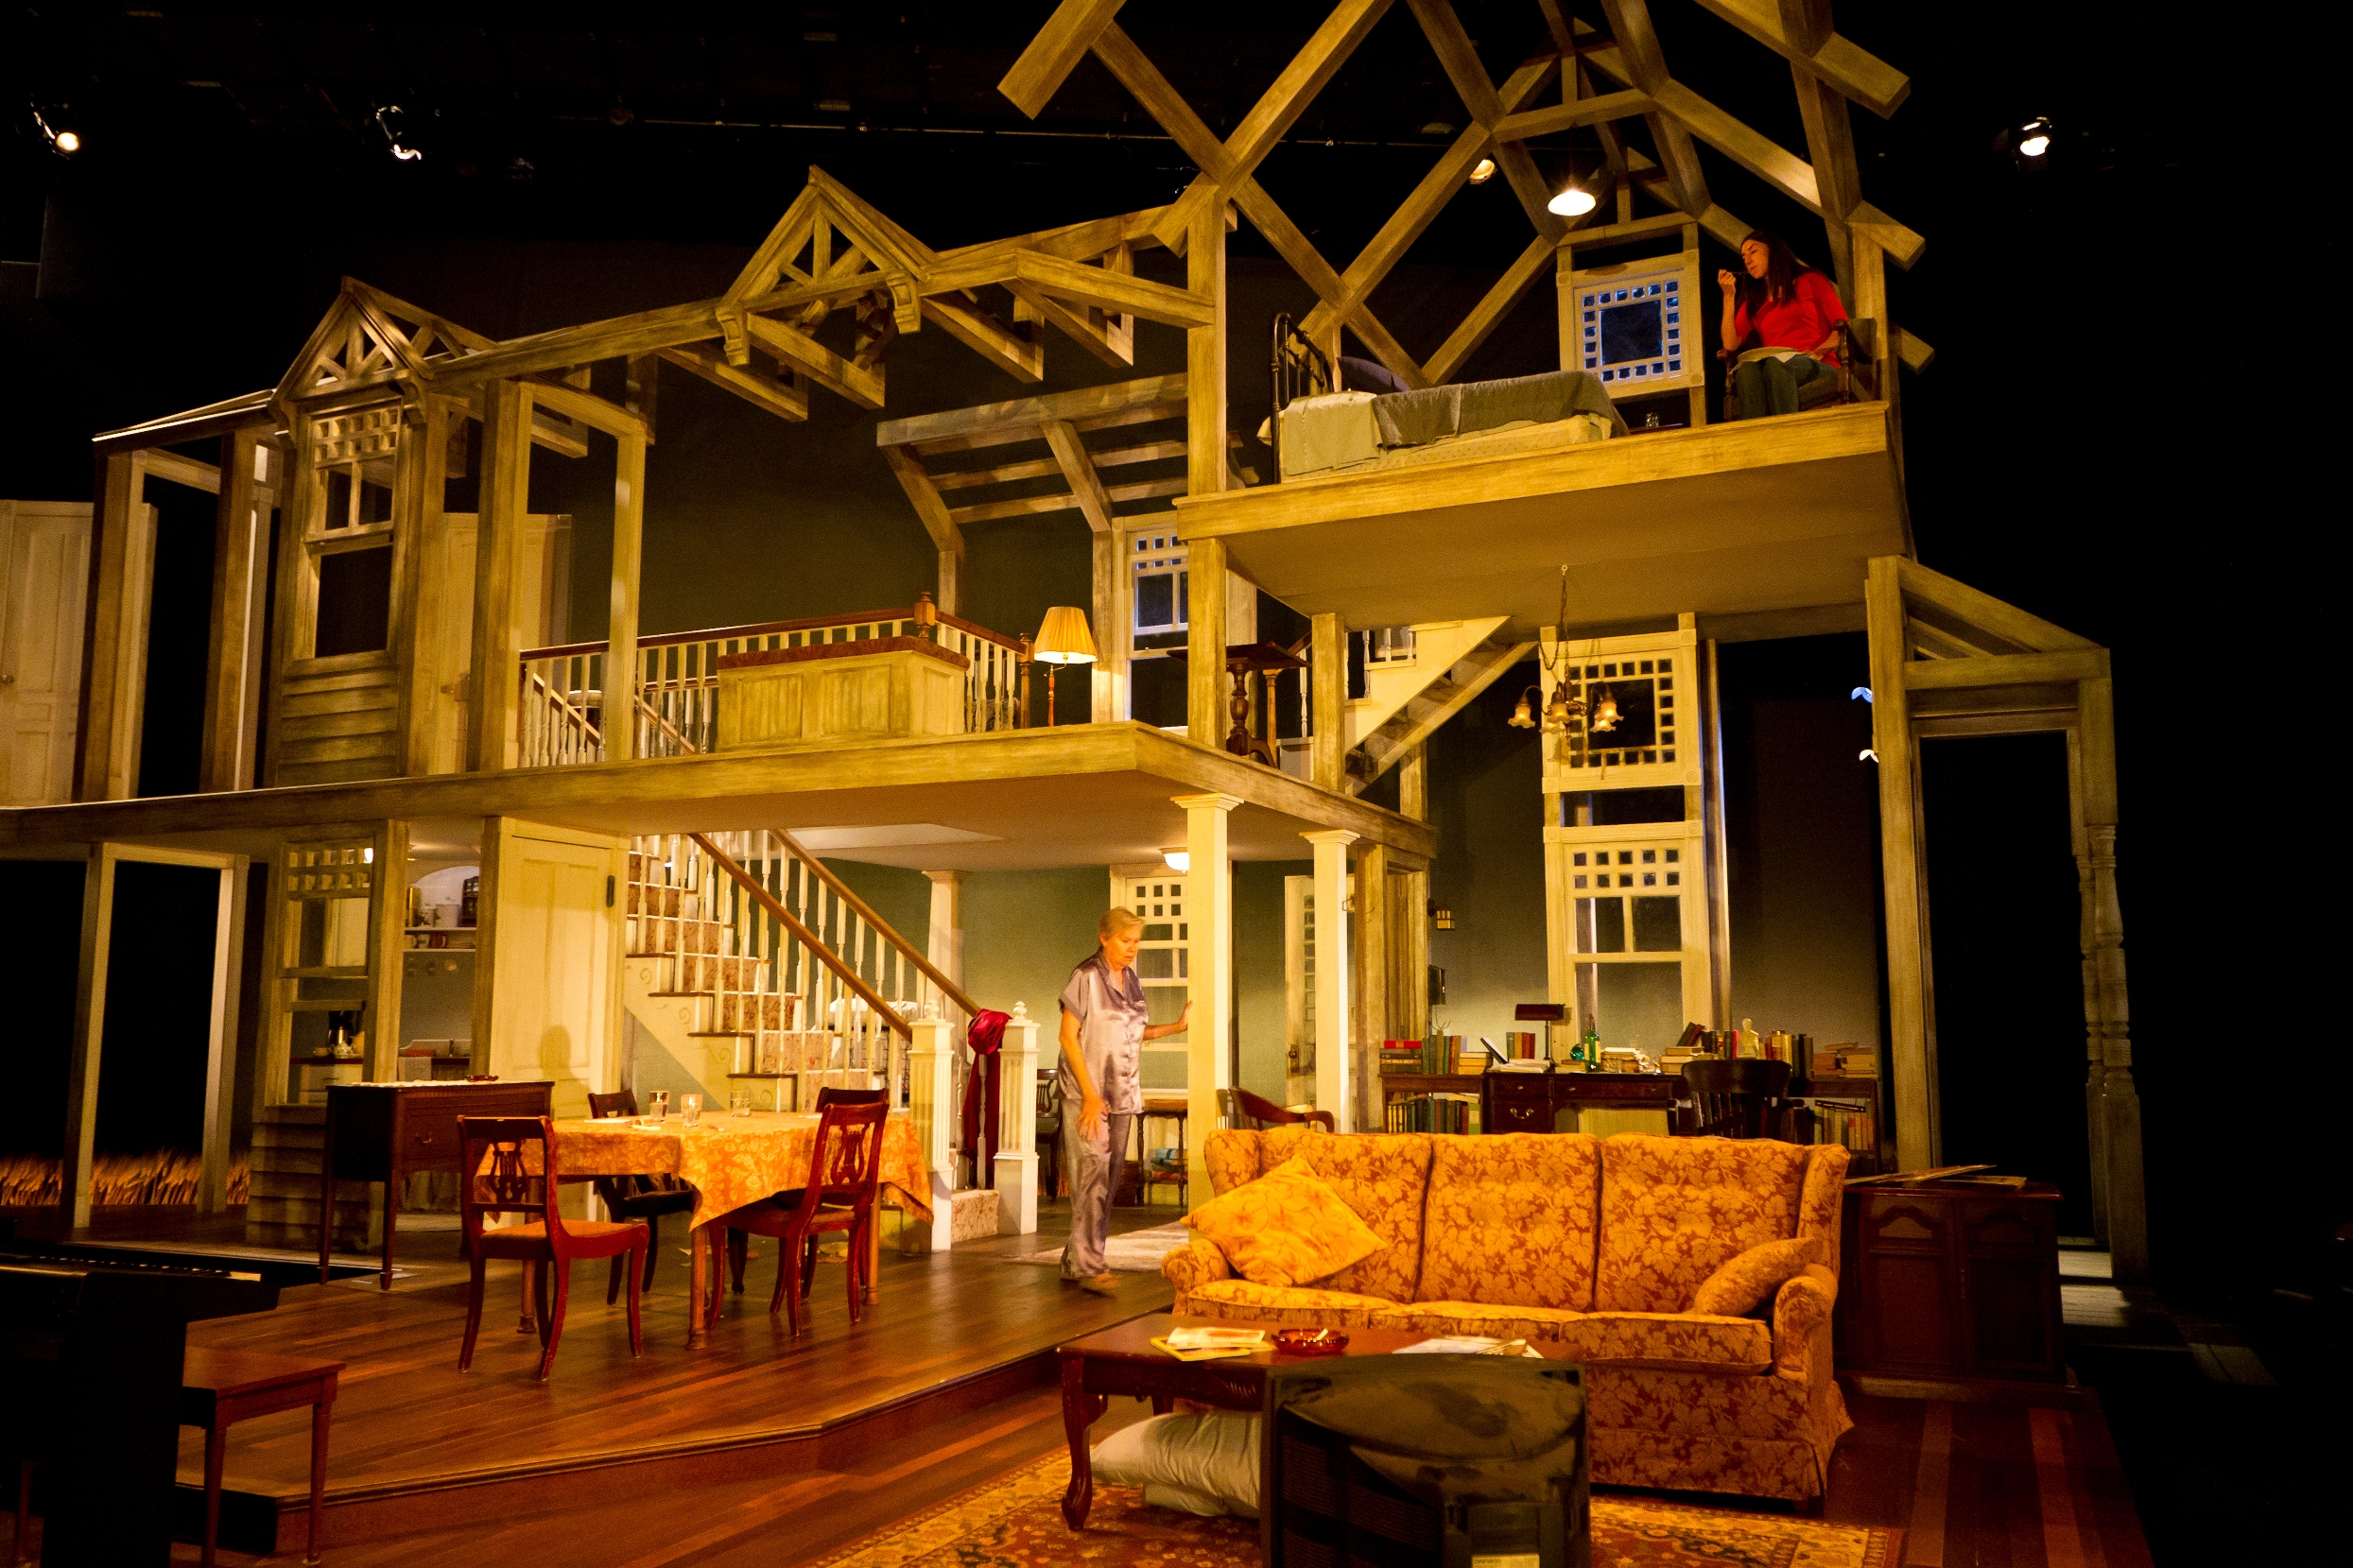  The  August: Osage County  house on the F. Otto Haas Stage as seen during a performance. 